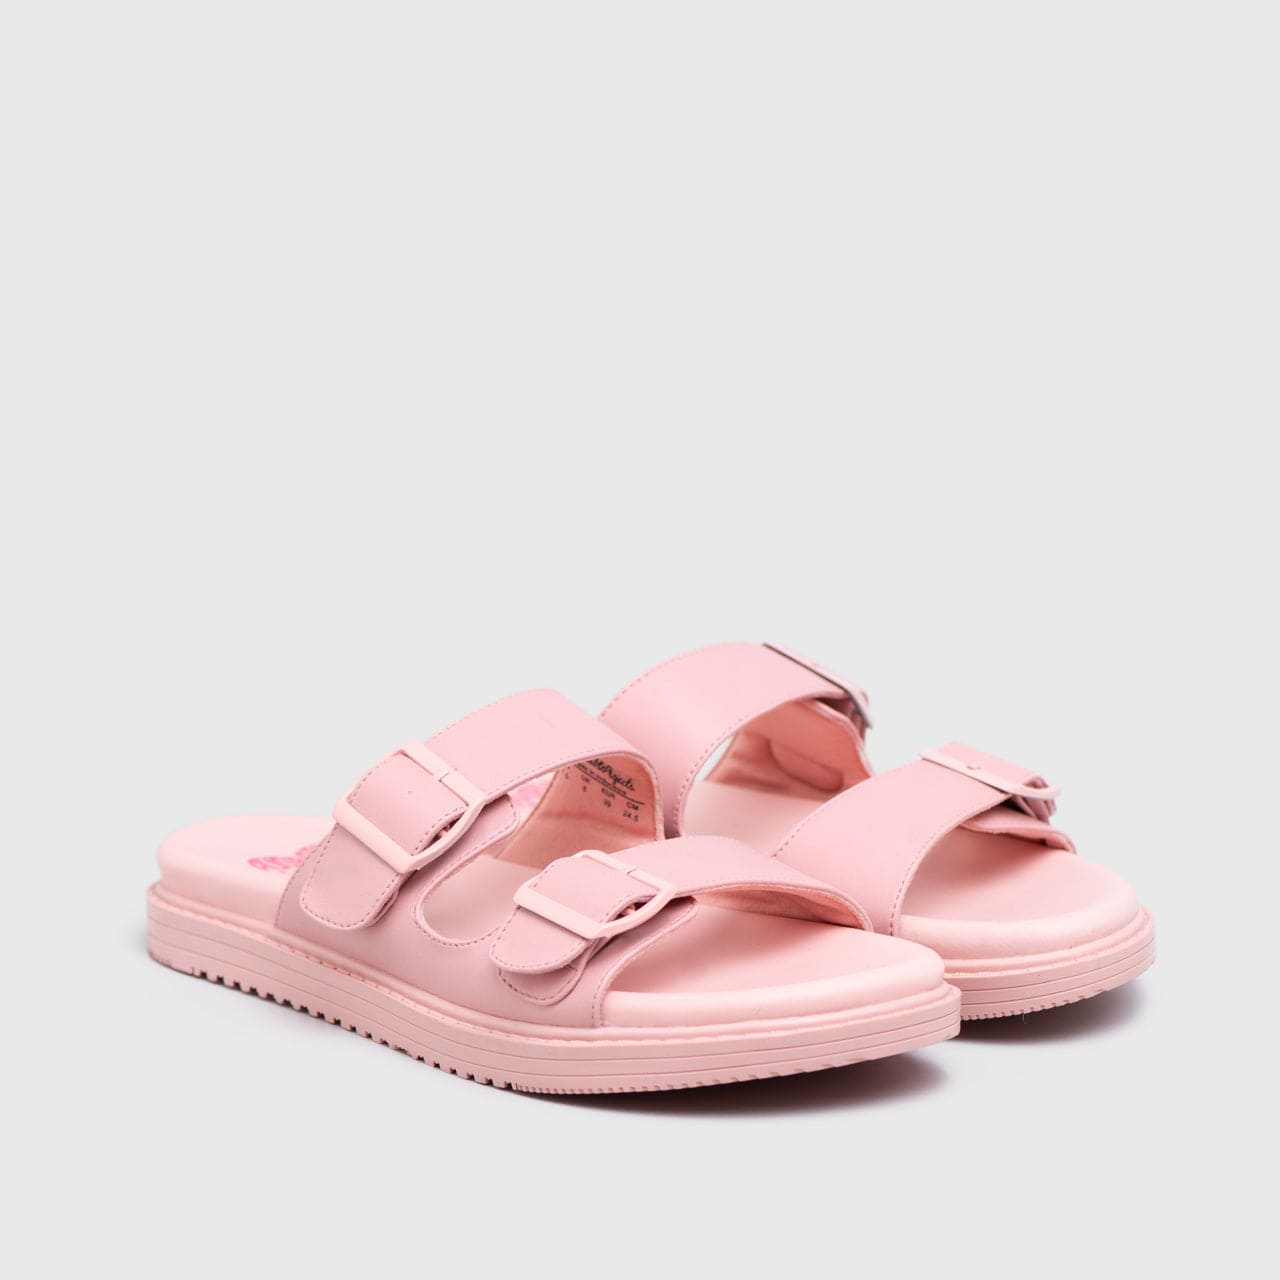 Adorable Projects Official 39 Adorableprojects - Claritaya Sandals Pink - Sendal Wanita